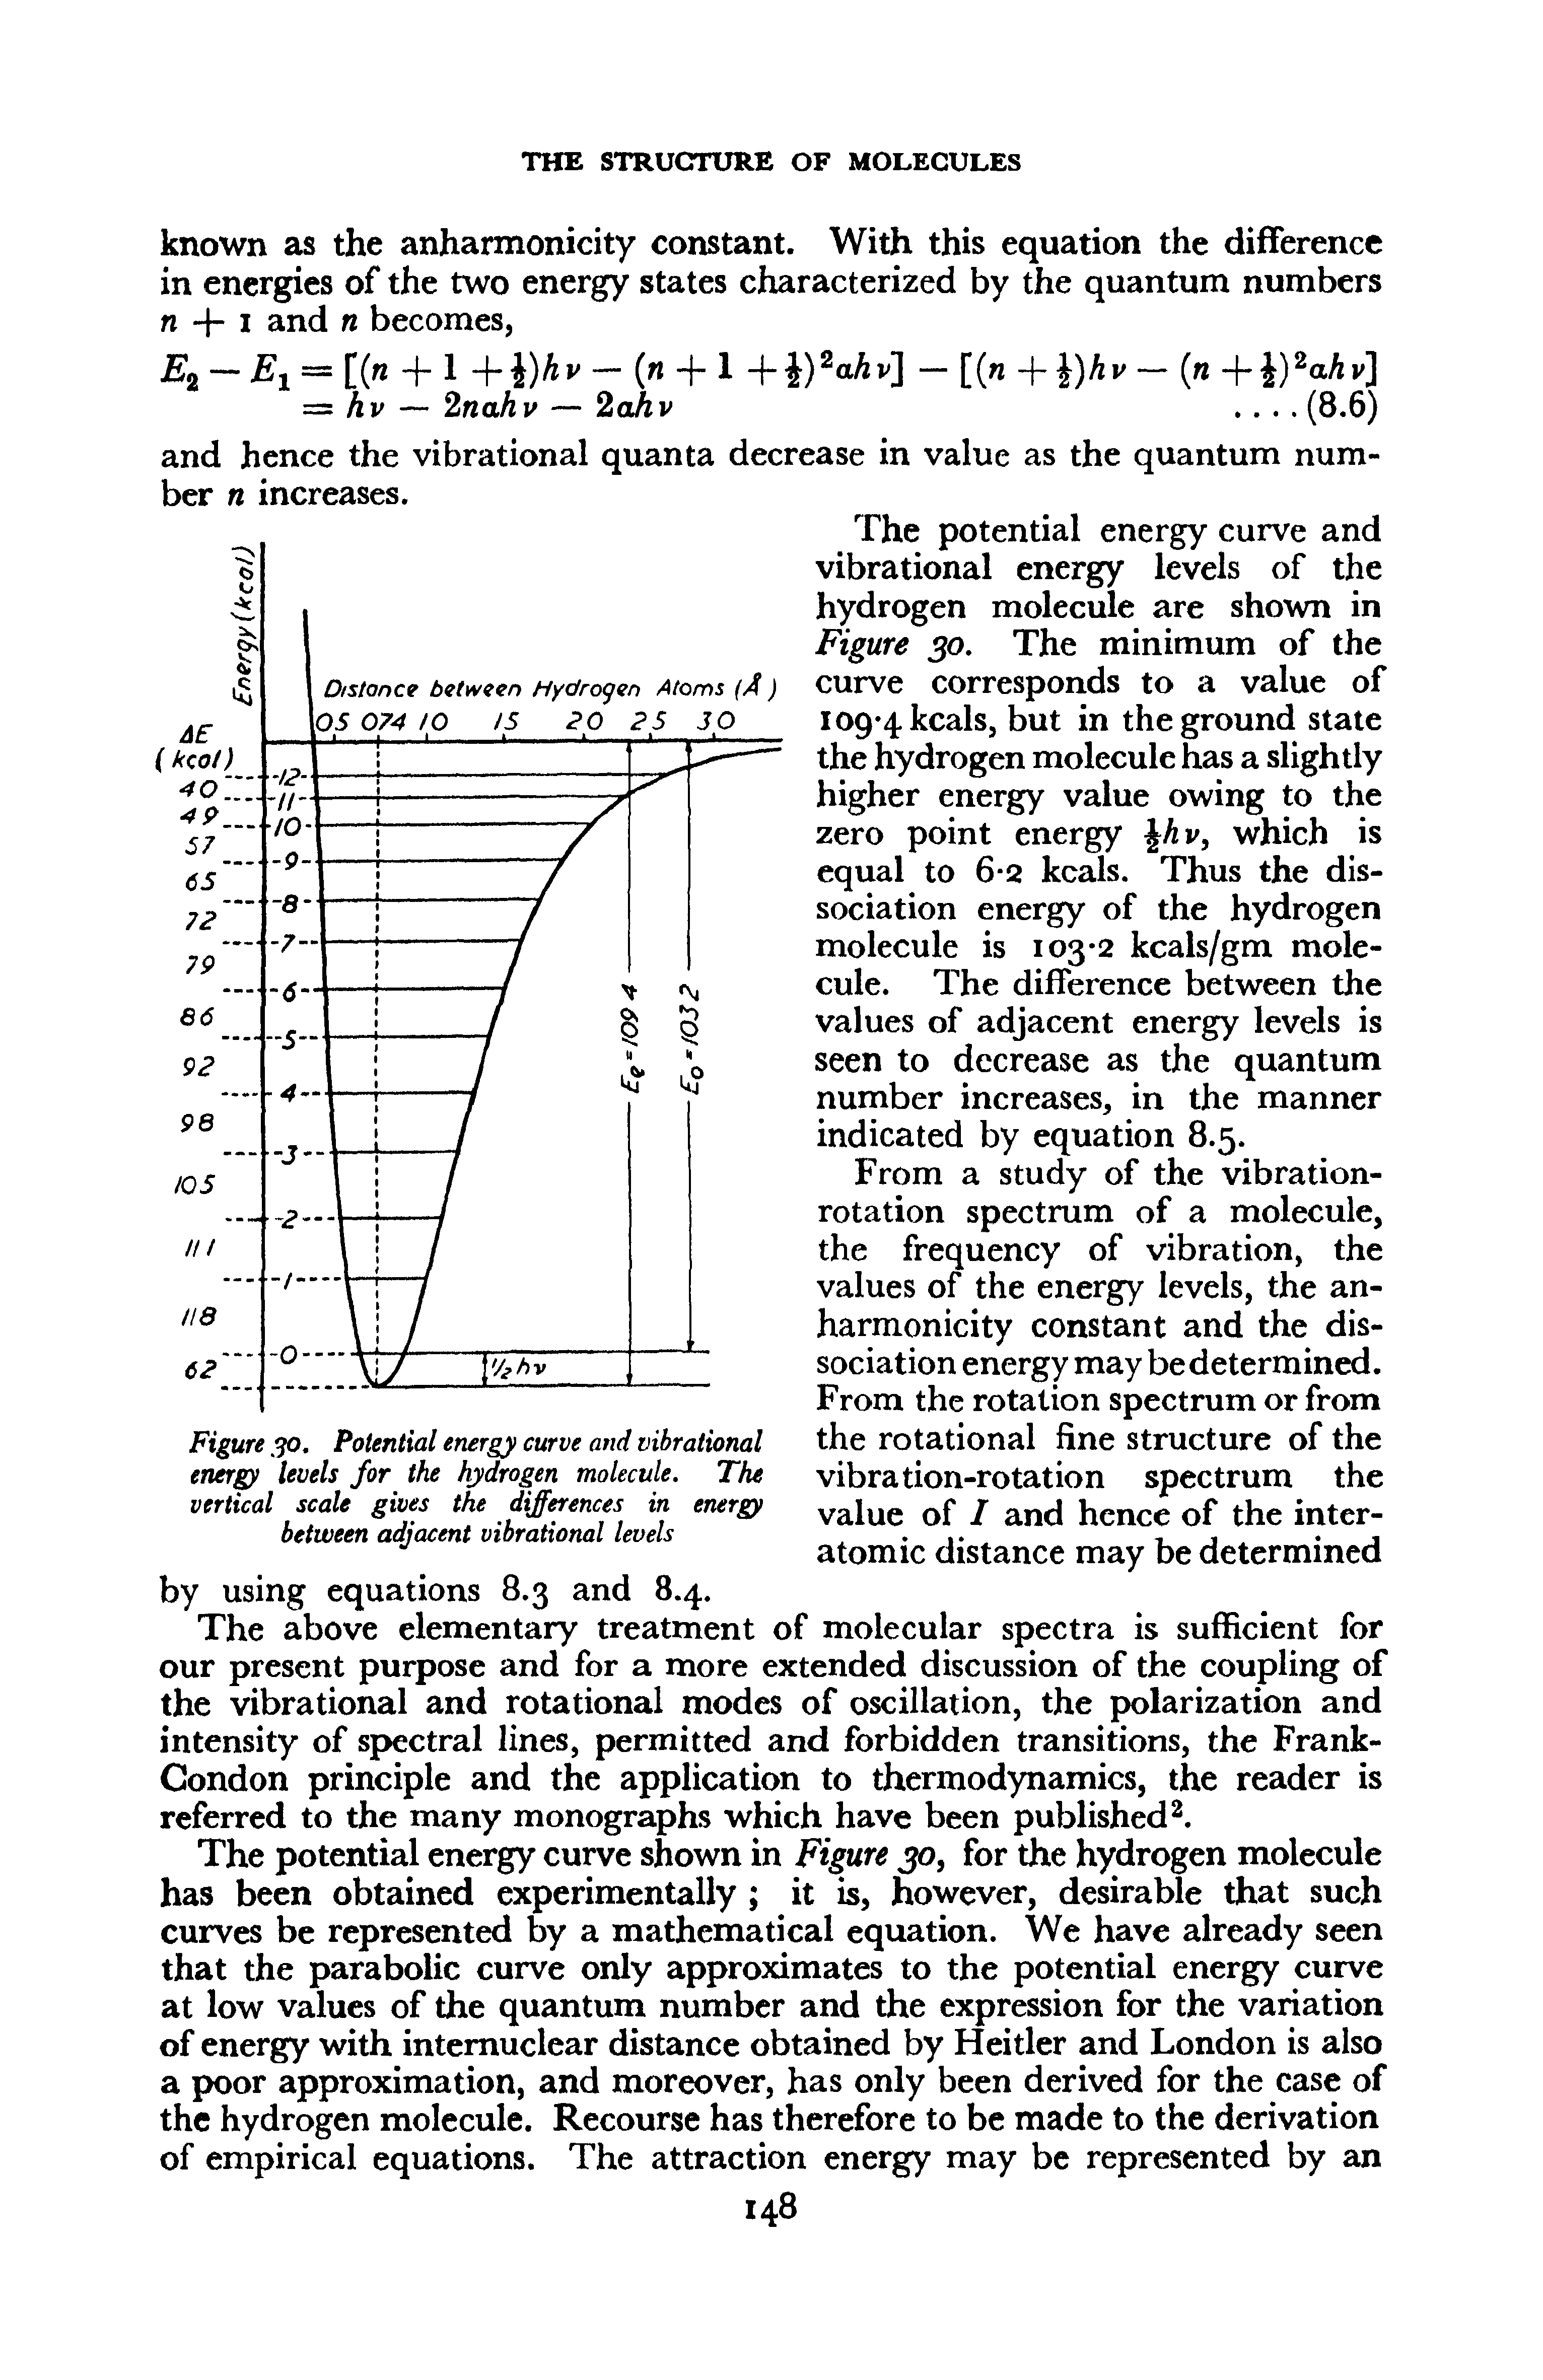 Figure. 90. Potential energy curve and vibrational energy levels for the hydrogen molecule. The vertical scale gives the differences in energy between adjacent vibrational levels...